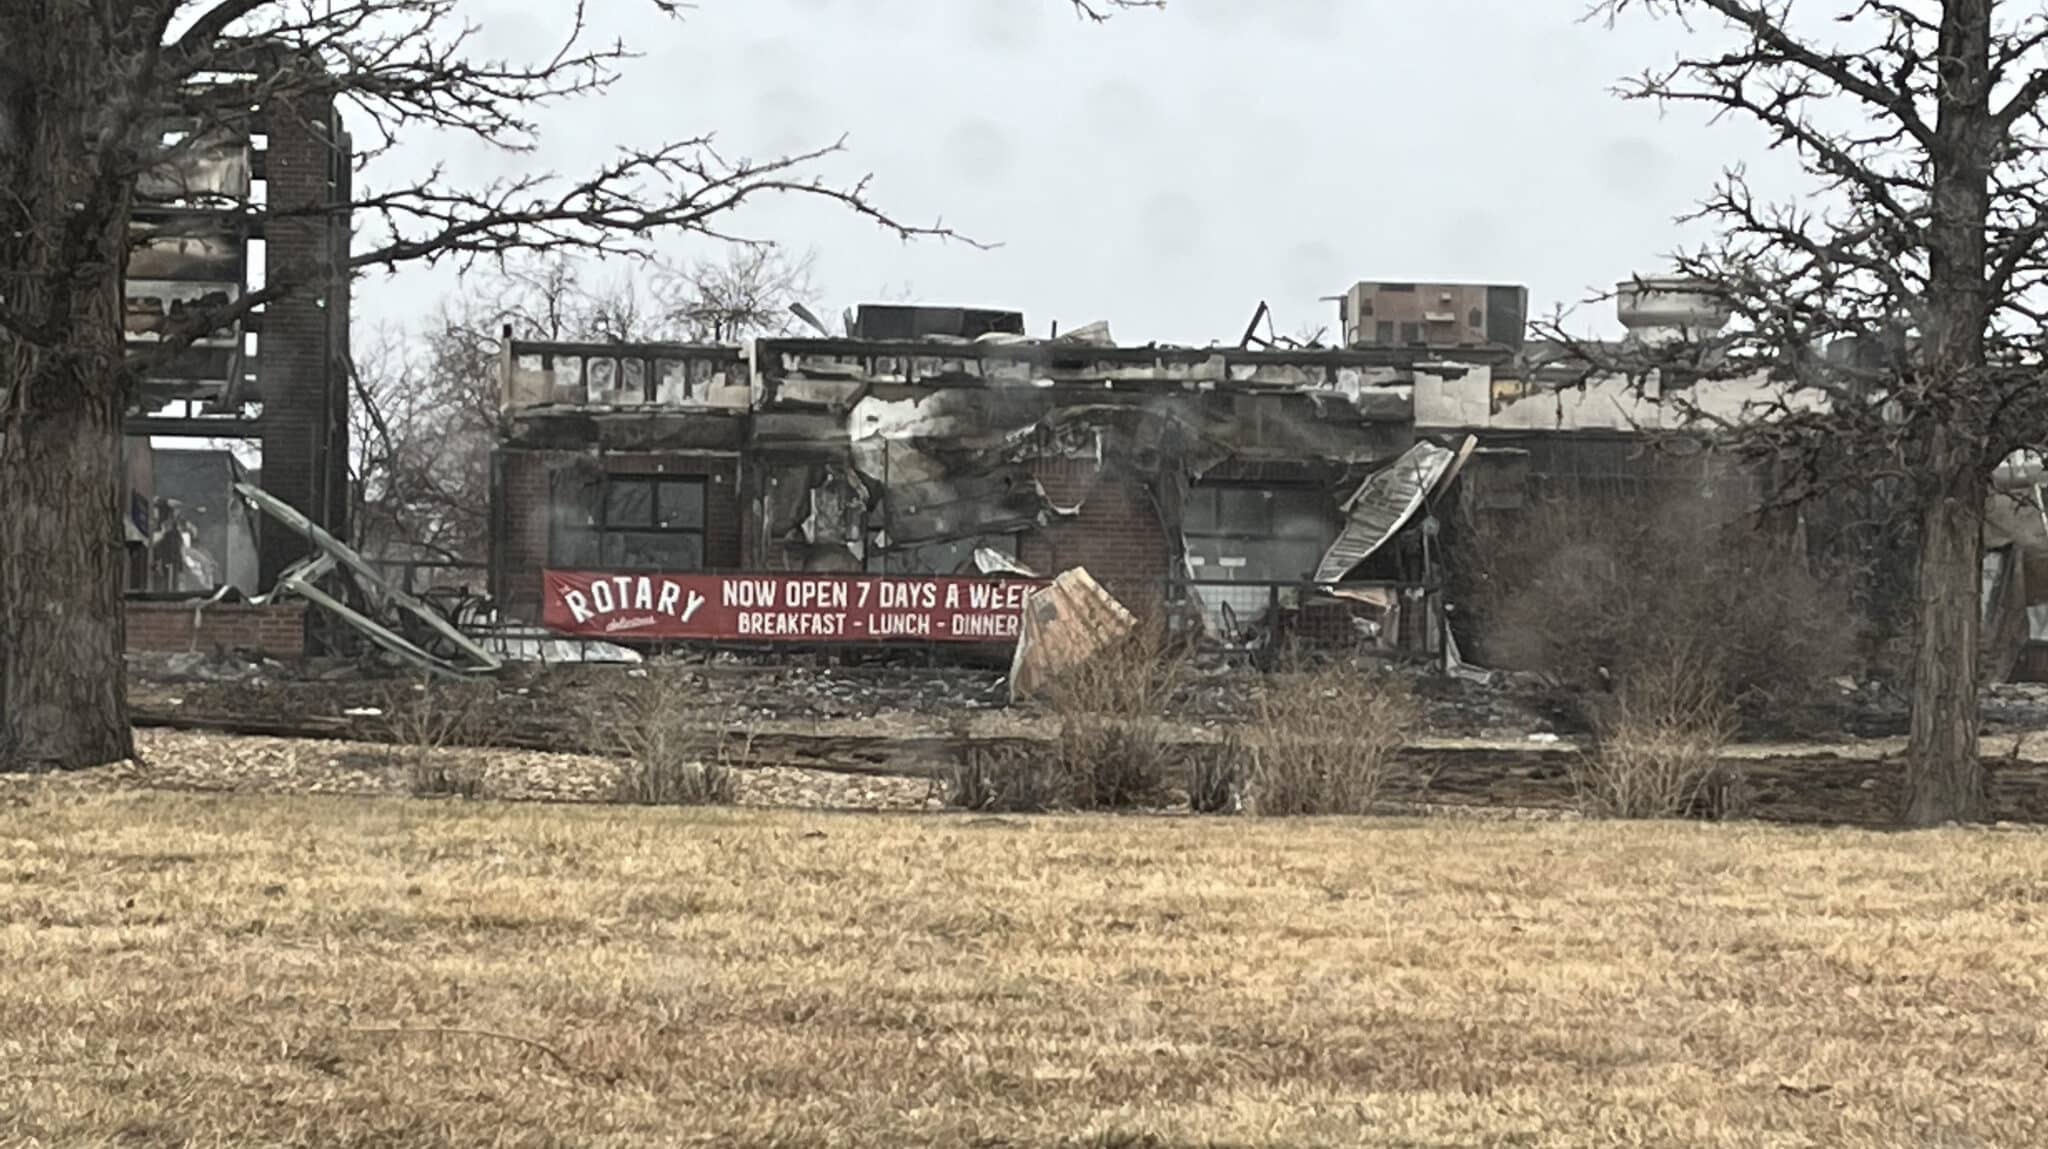 The Rotary restaurant in Louisville destroyed by fire